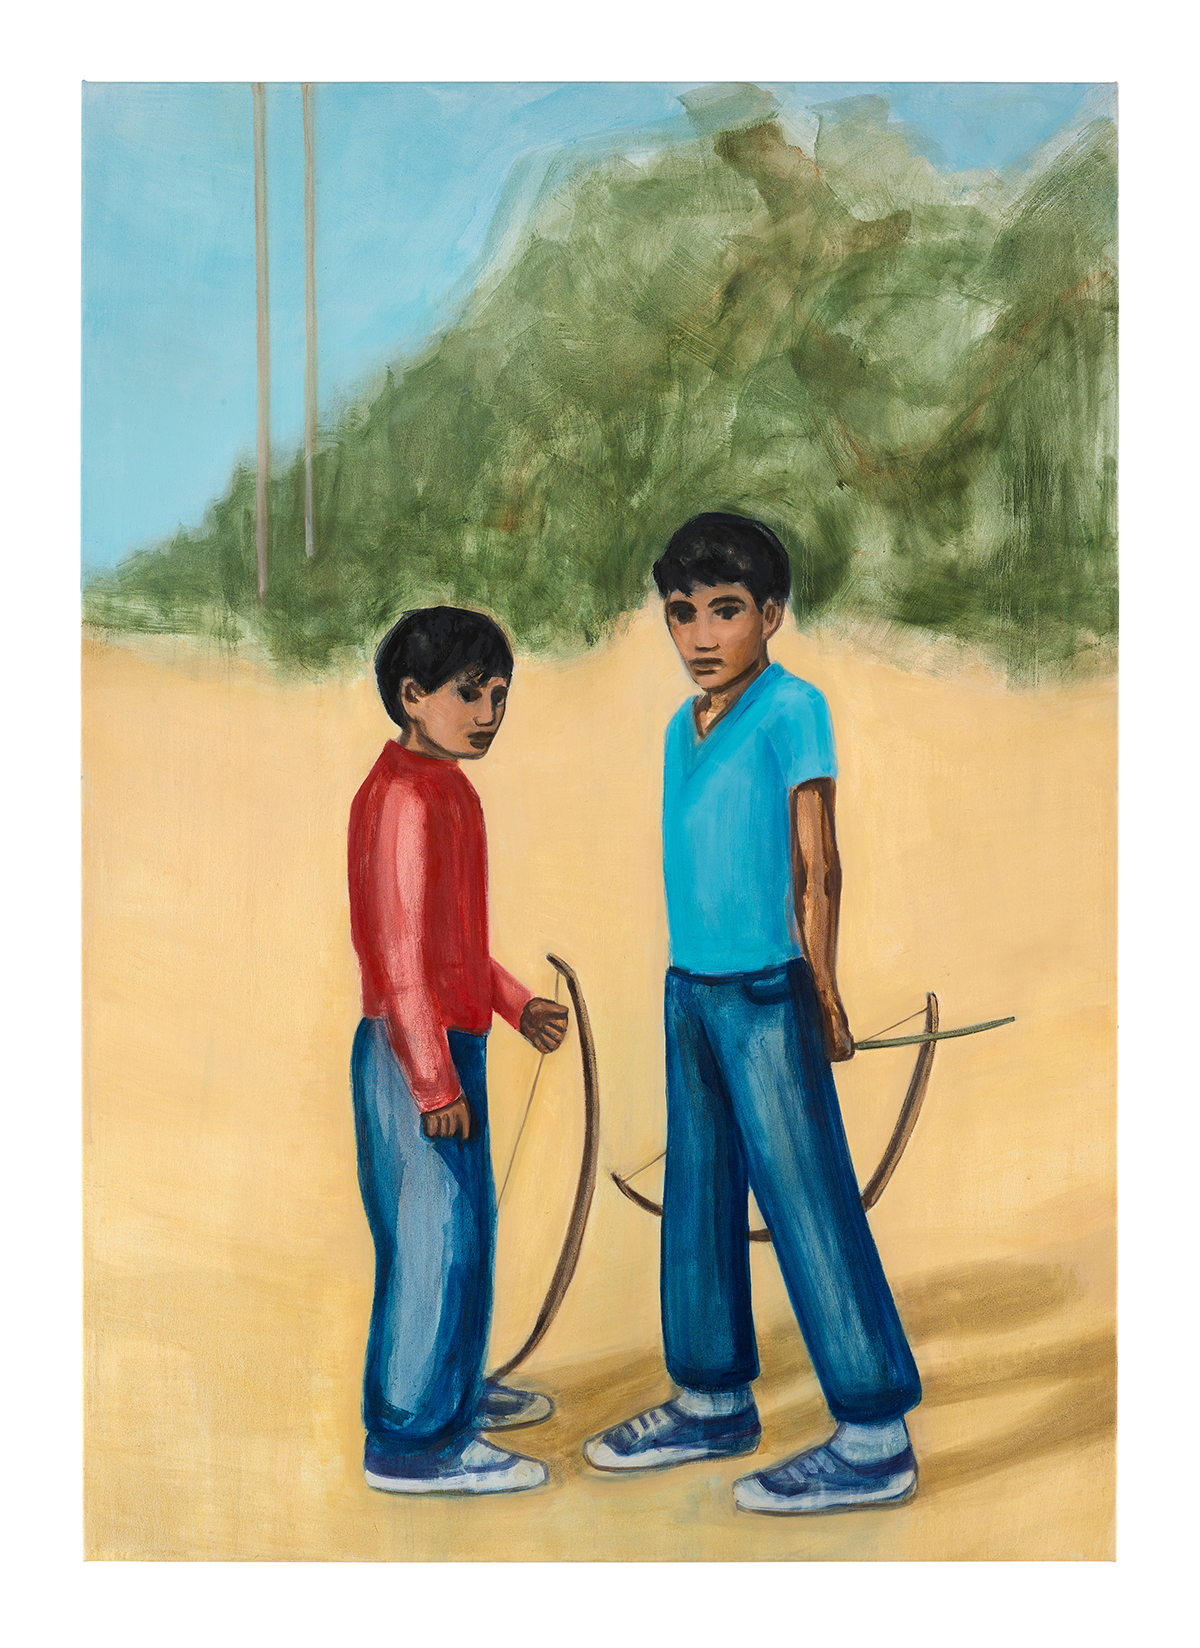 Two boys standing in red and bleu tops and jeans holding archery bows